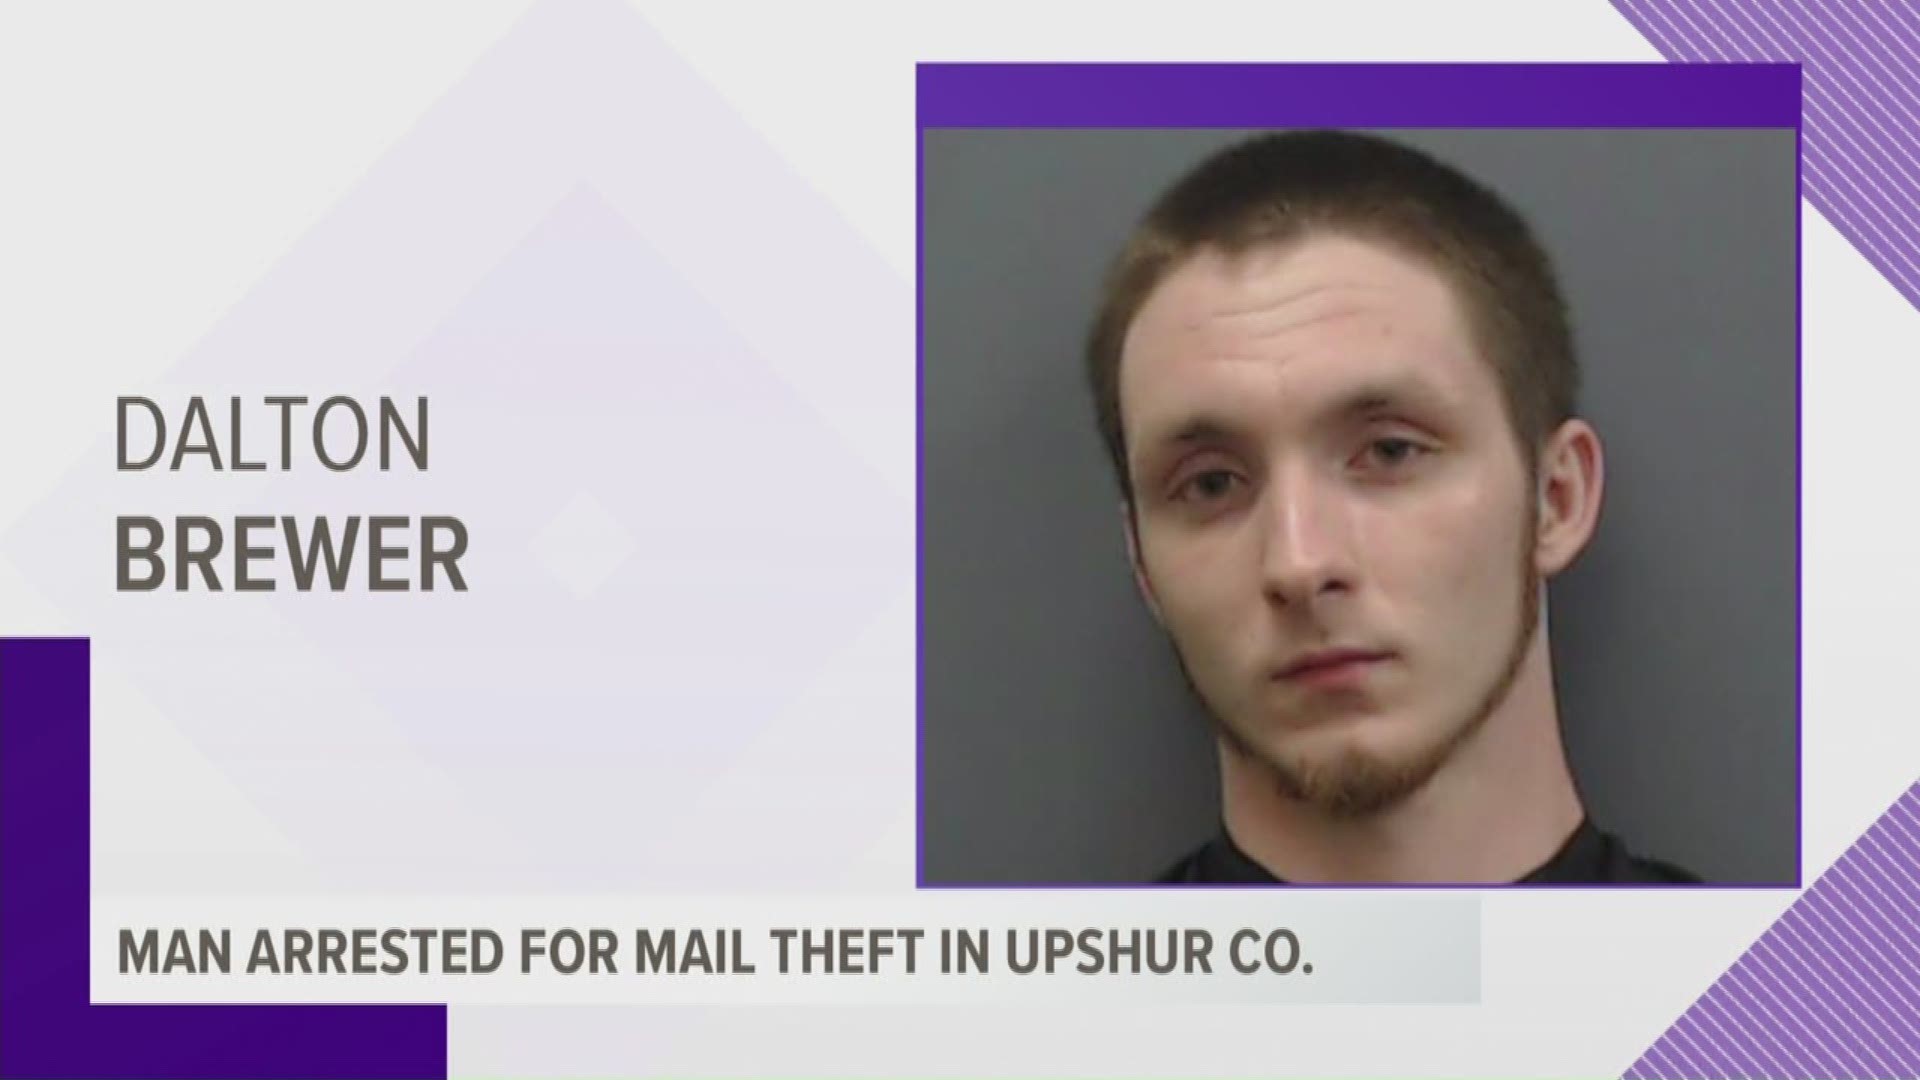 Dalton Brewer, 24, was arrested for mail theft and fraud.